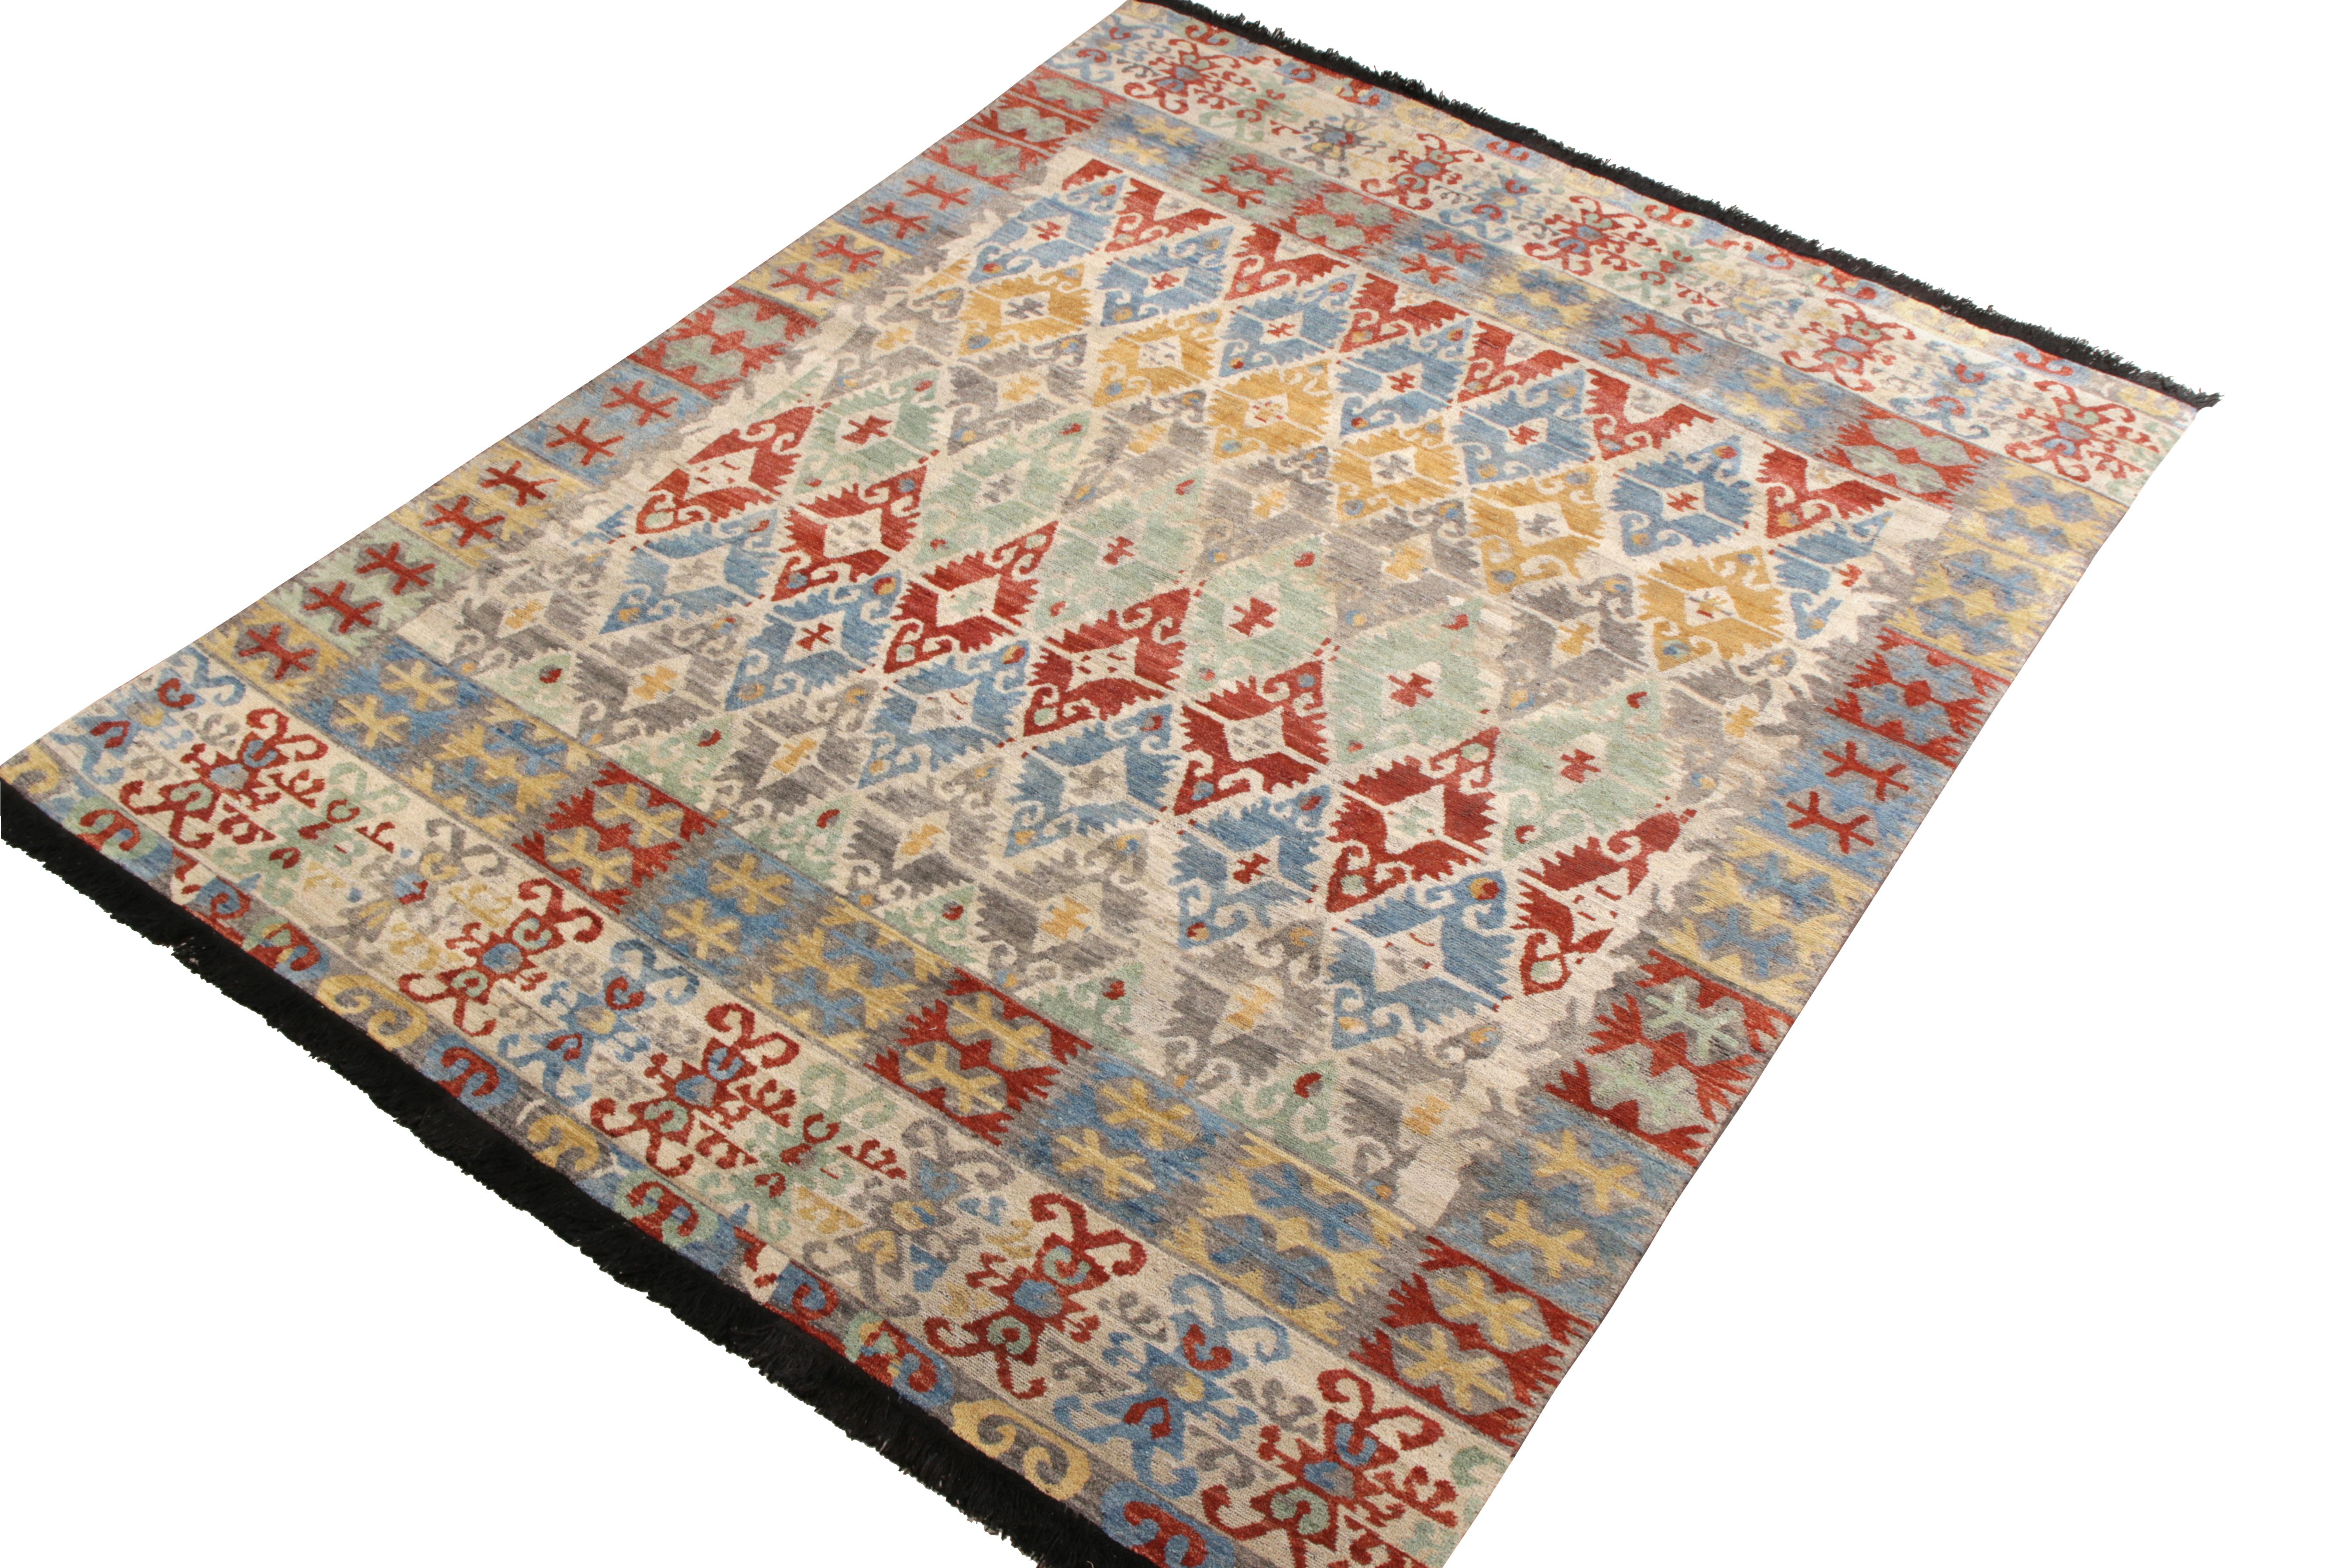 An 8 x 10 custom rug design paying homage to classic Kilim patterns, from Rug & Kilim’s Burano Collection. Hand knotted in soft Ghazni wool pile for a beautiful classic look with fresh and chic, lived-in colors. Prevailing gold, blue, and red with